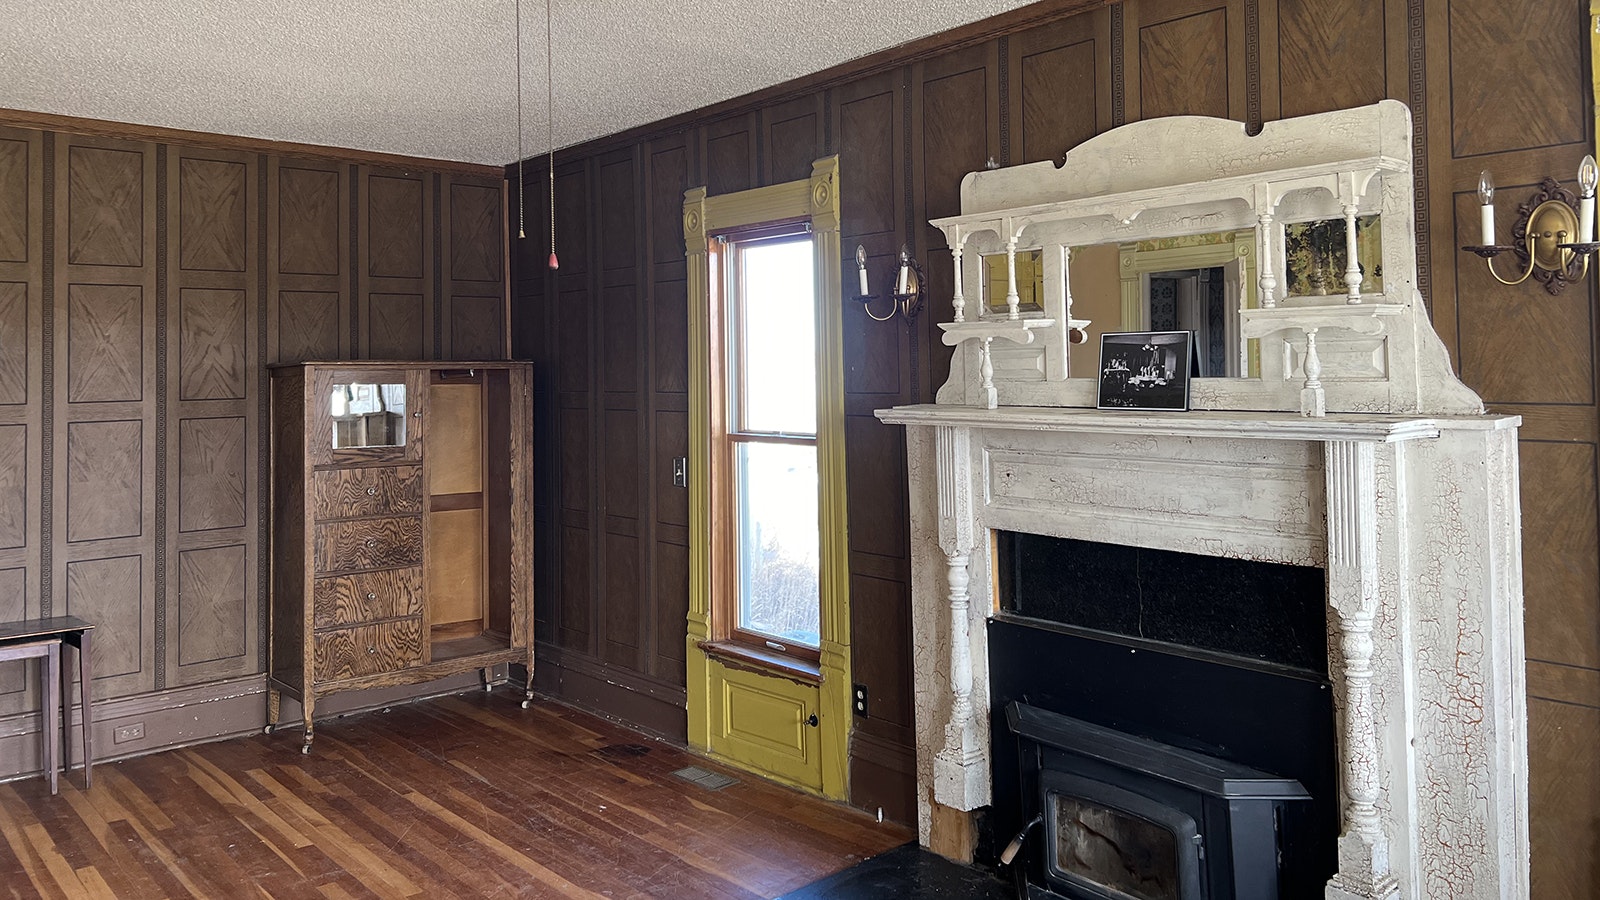 Although Laramie’s Holliday House has gone through alterations since it was first built in 1878, many parts of it, like the front room fireplace mantle, are original.